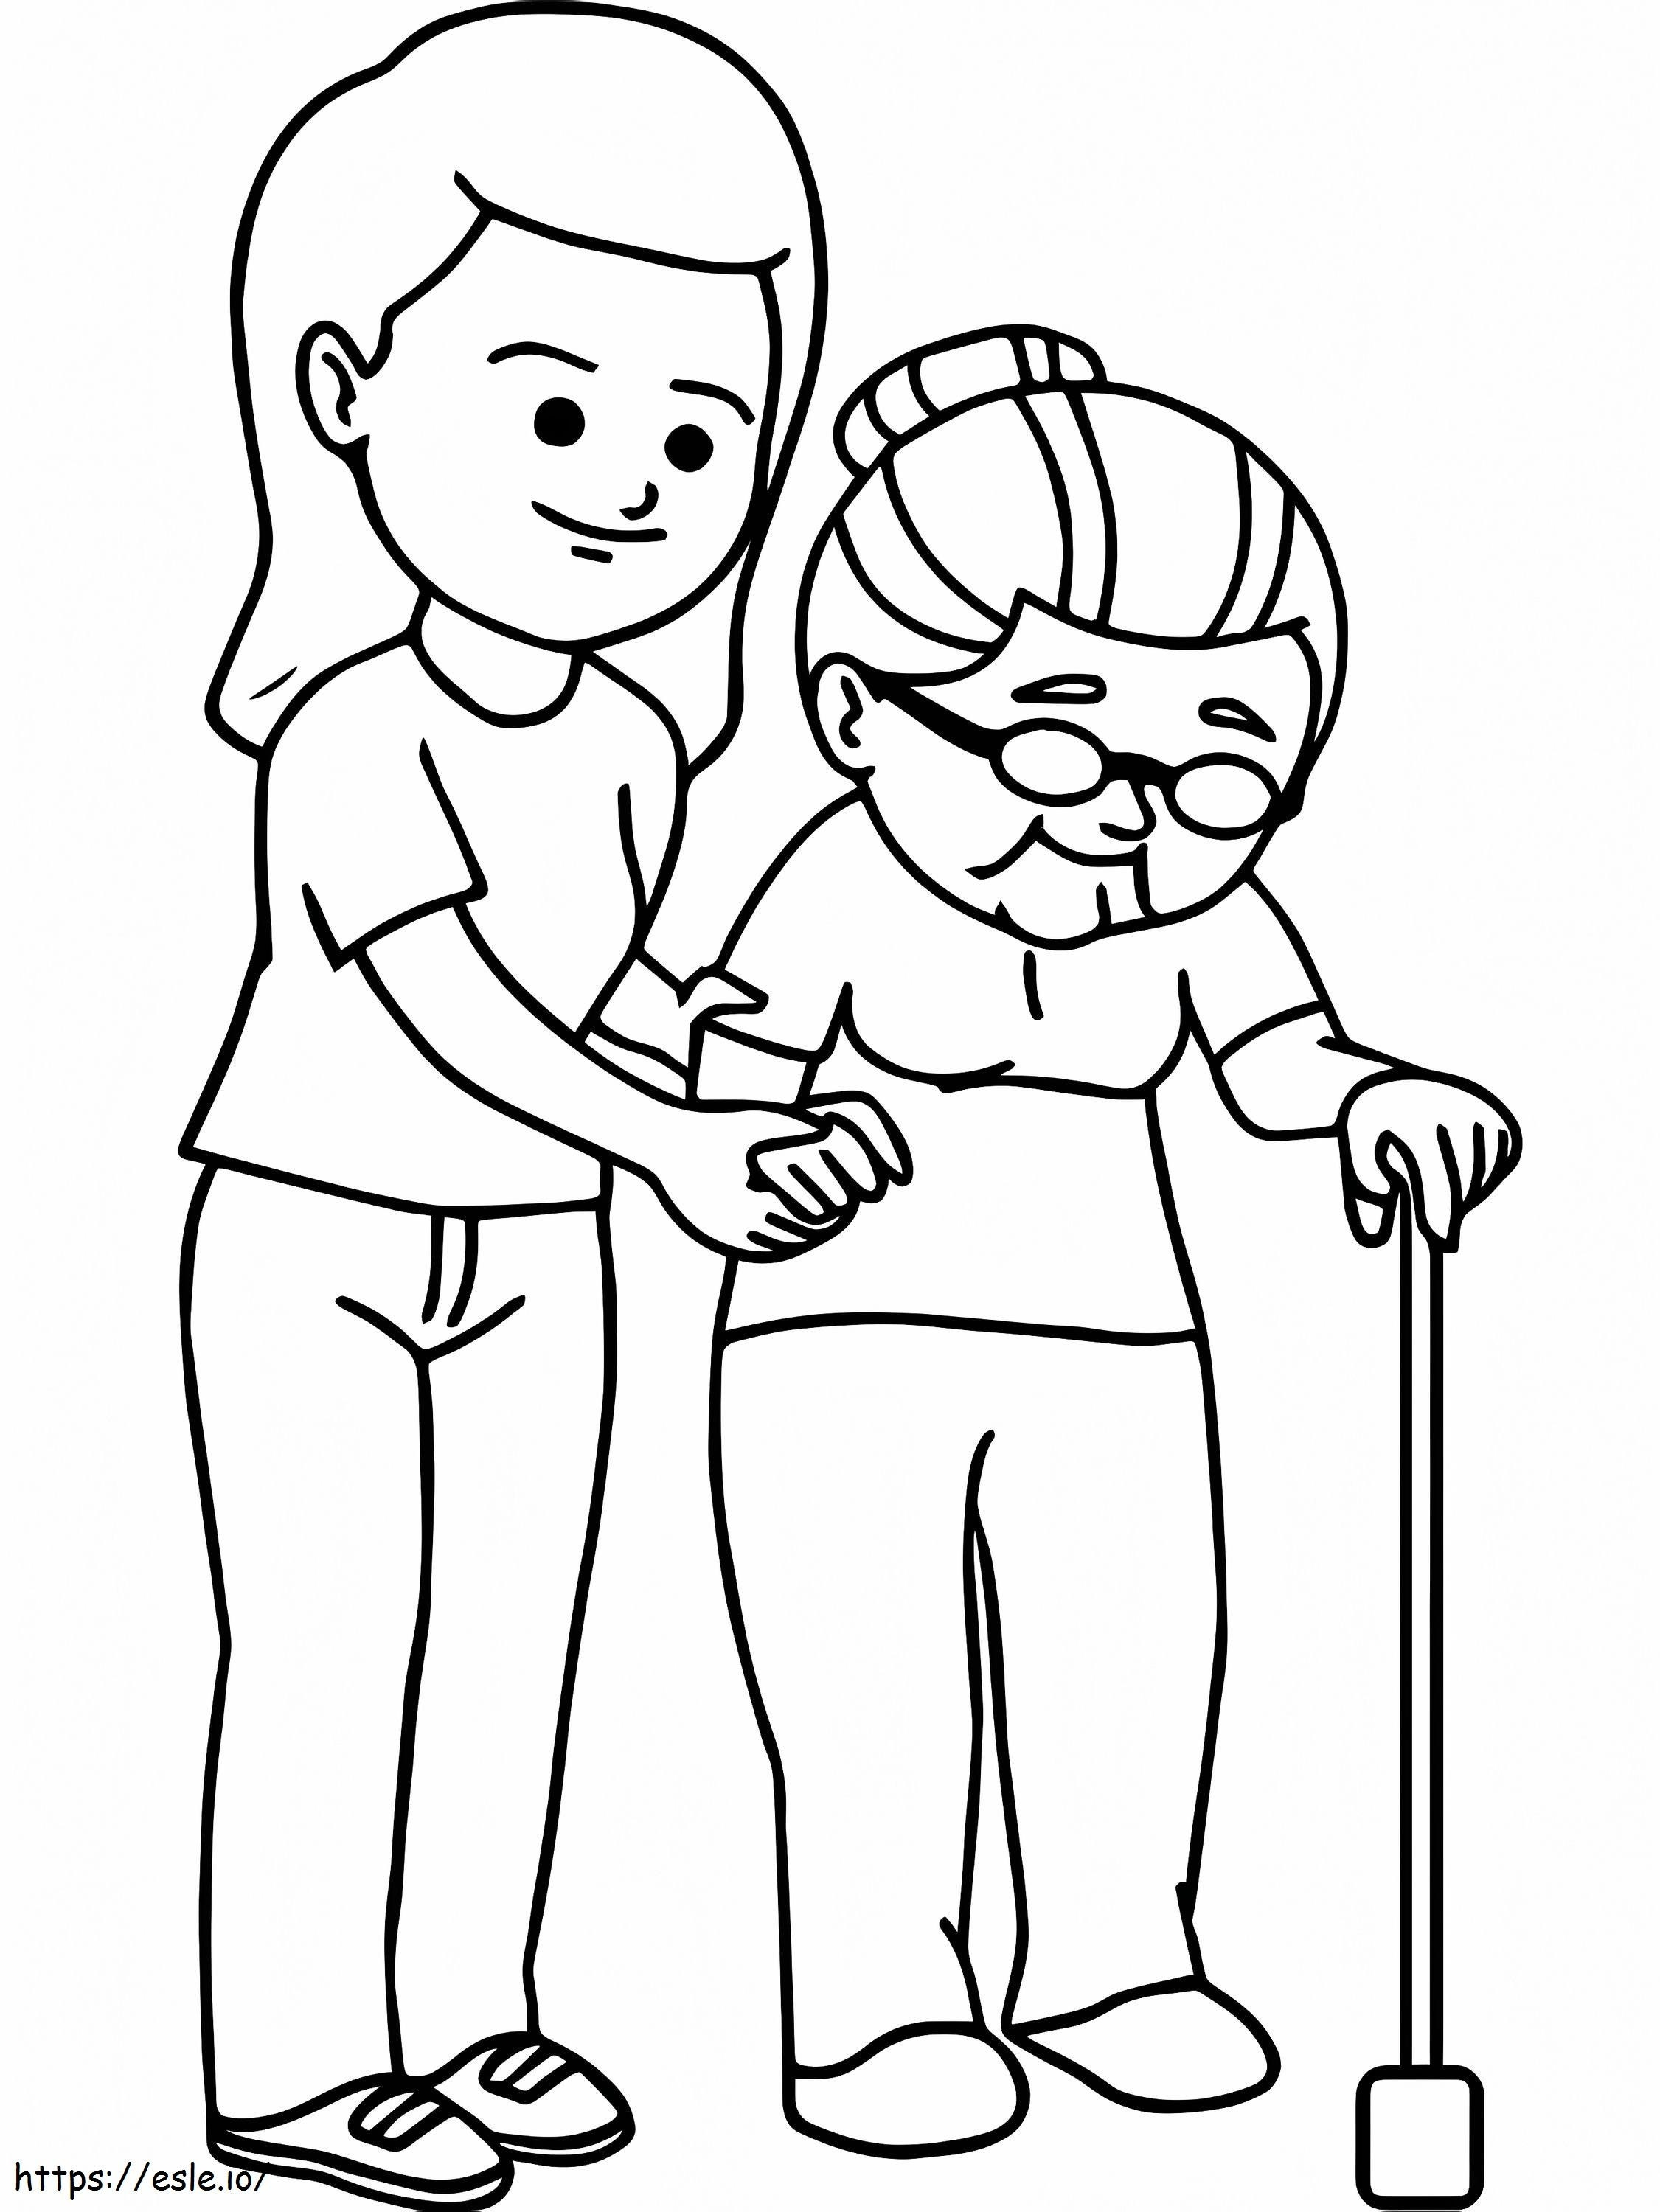 Kindness 3 coloring page